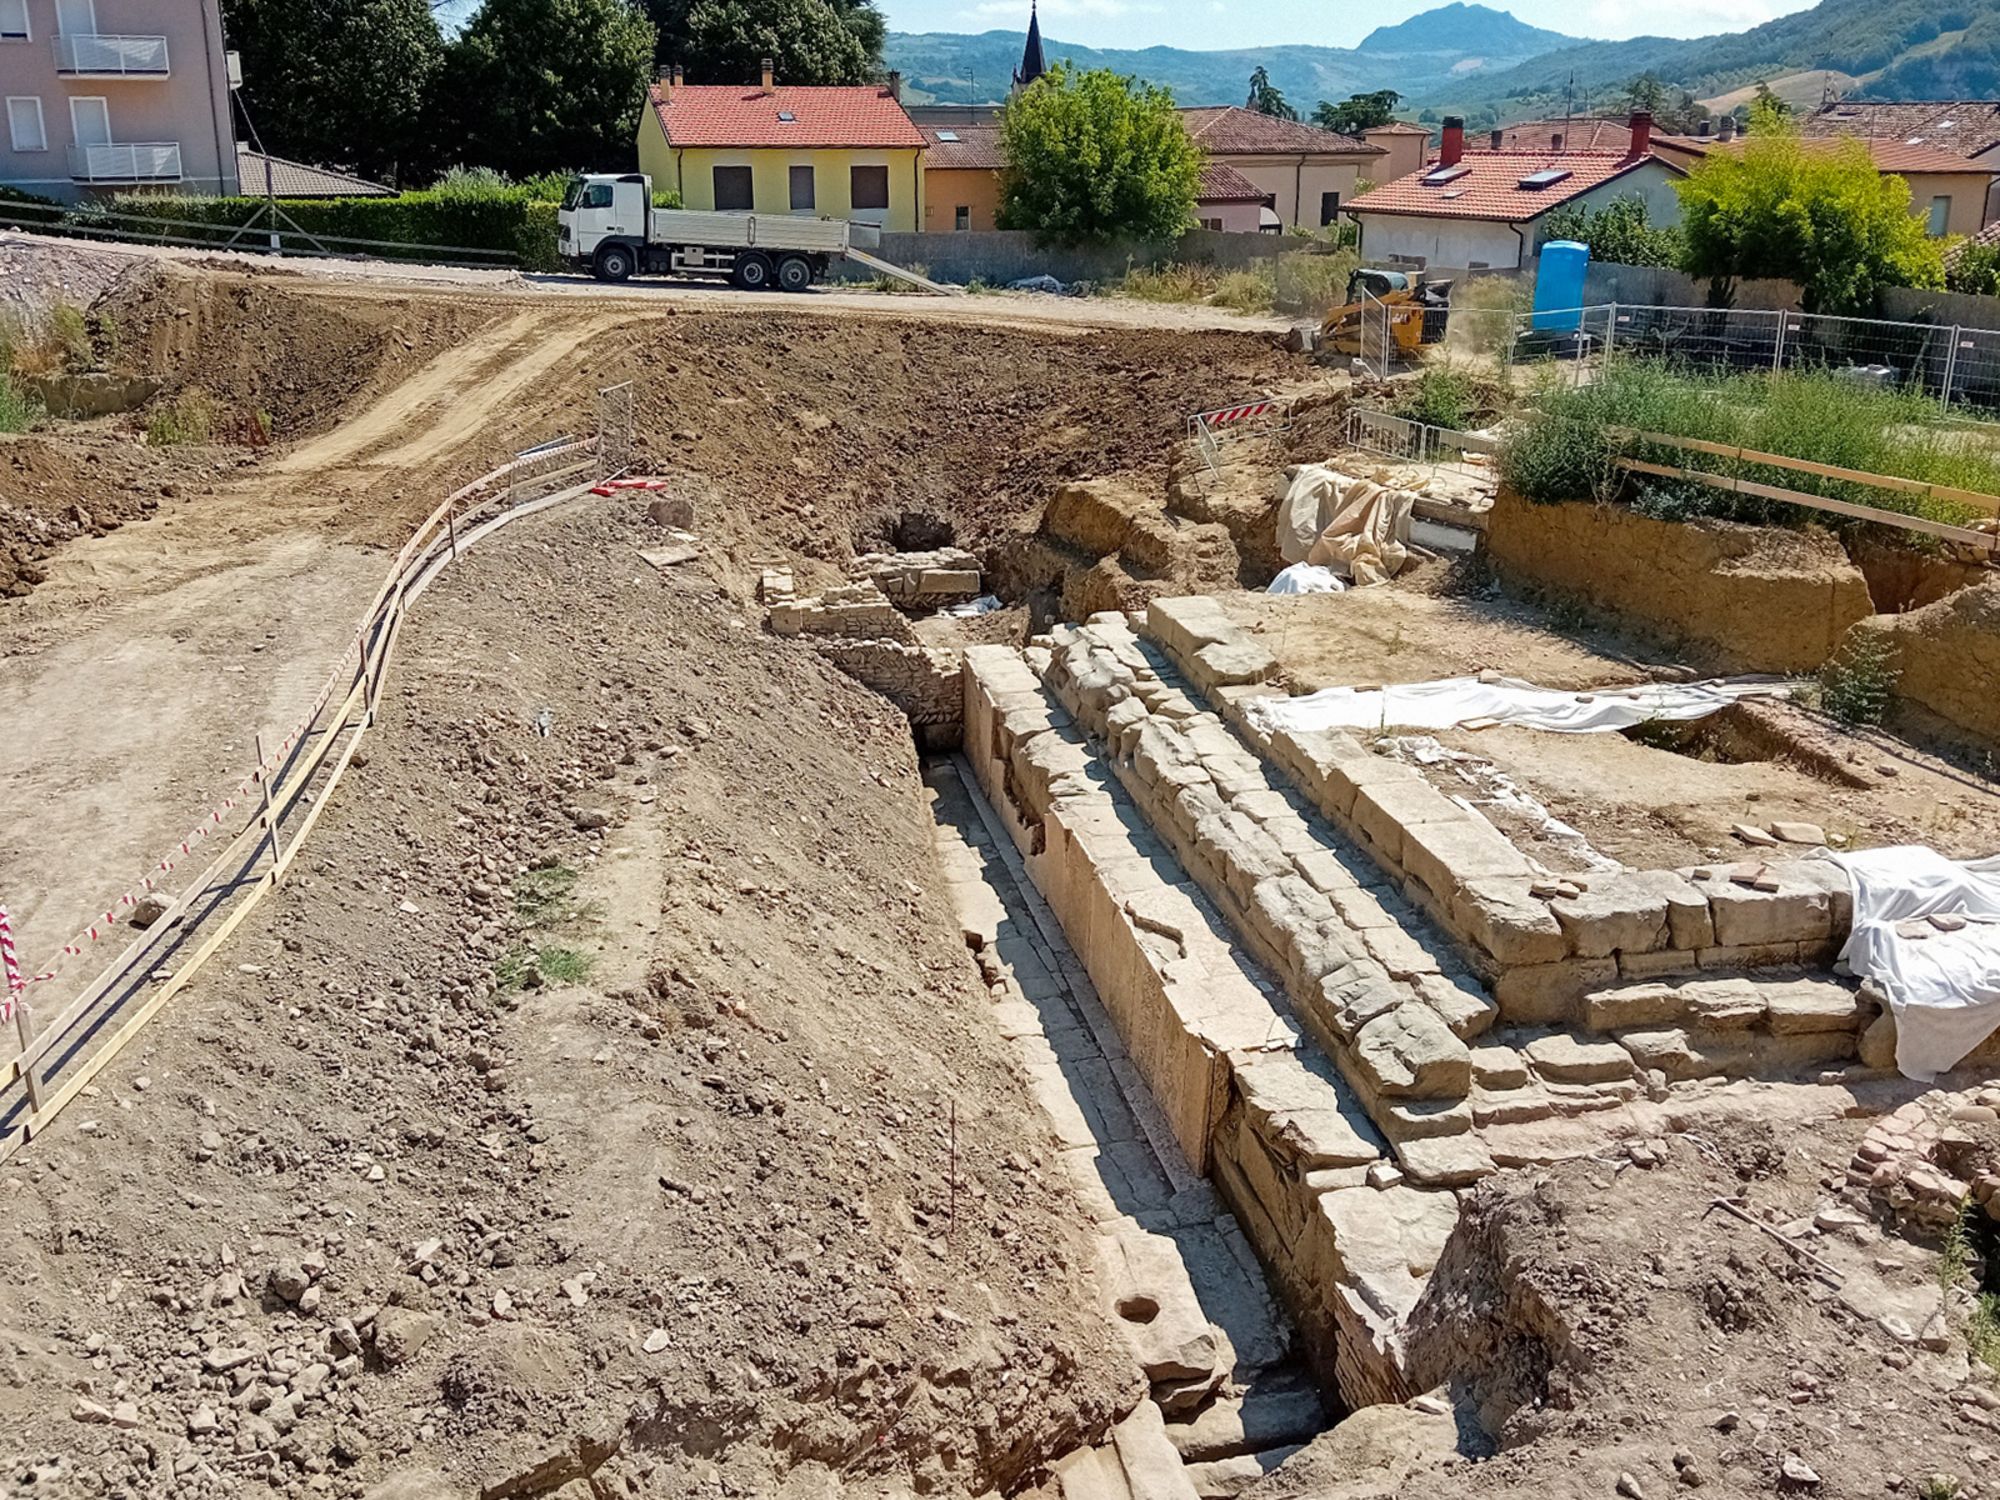 The discovery of significant temple ruins in the small town of Sarsini will improve our modern-day understanding of "how ancient Roman towns rose and fell across time," experts say.